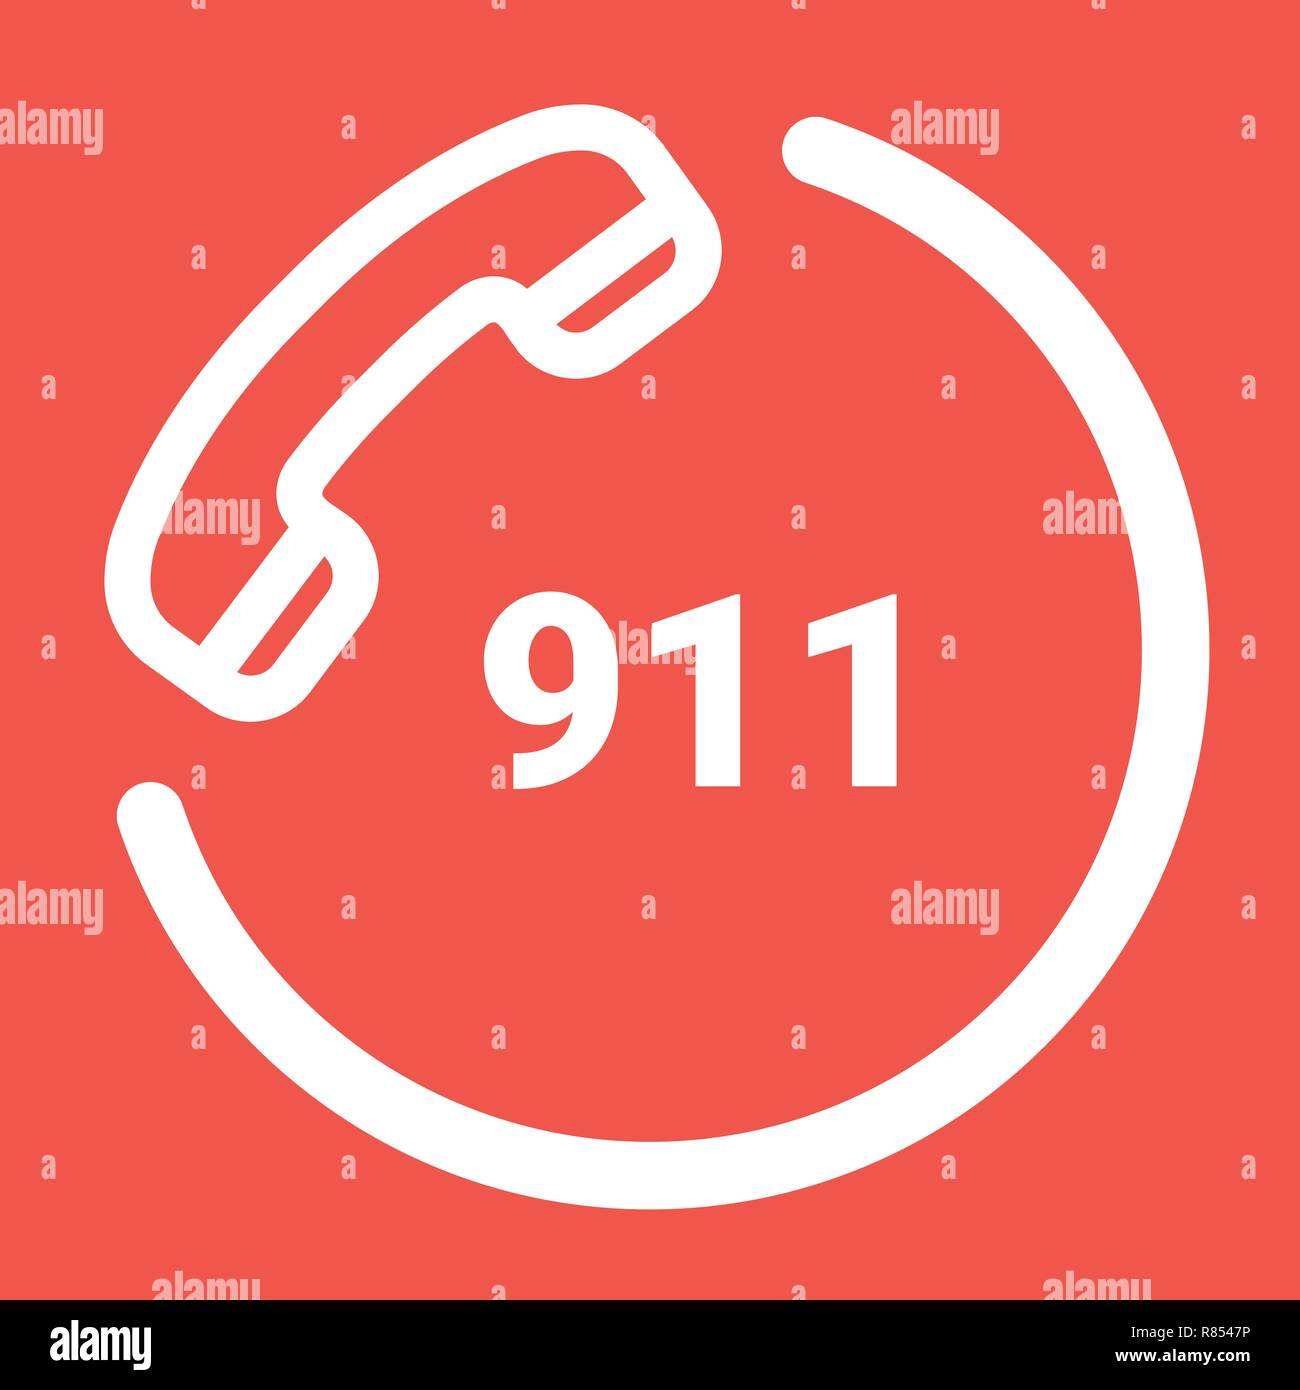 911 Emergency Call Number Isolated On A White Background. Vector Icon Illustration. Stock Vector